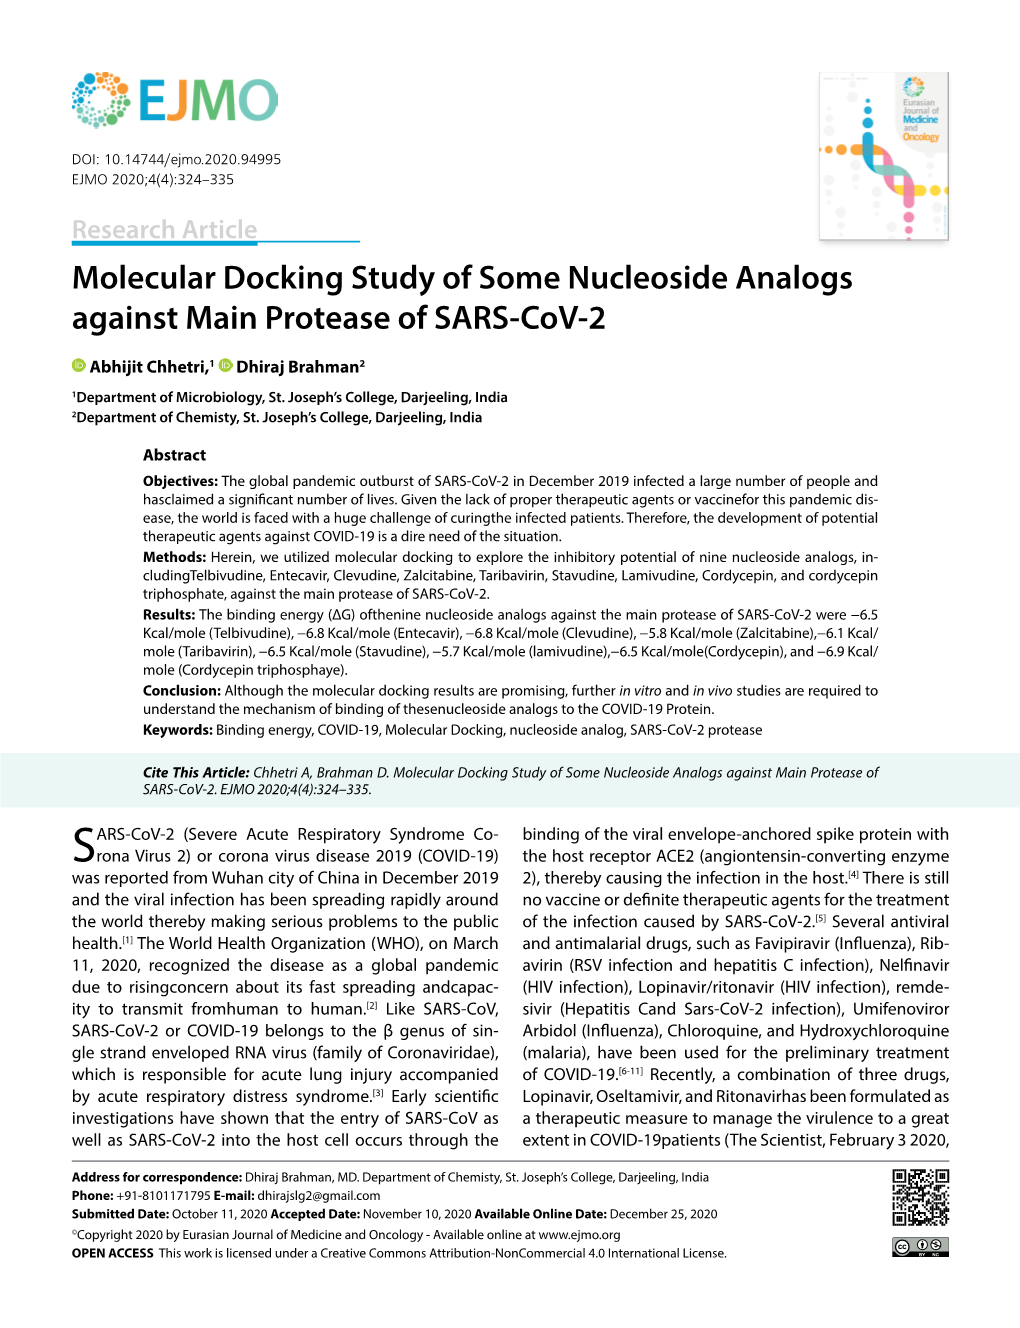 Molecular Docking Study of Some Nucleoside Analogs Against Main Protease of SARS-Cov-2